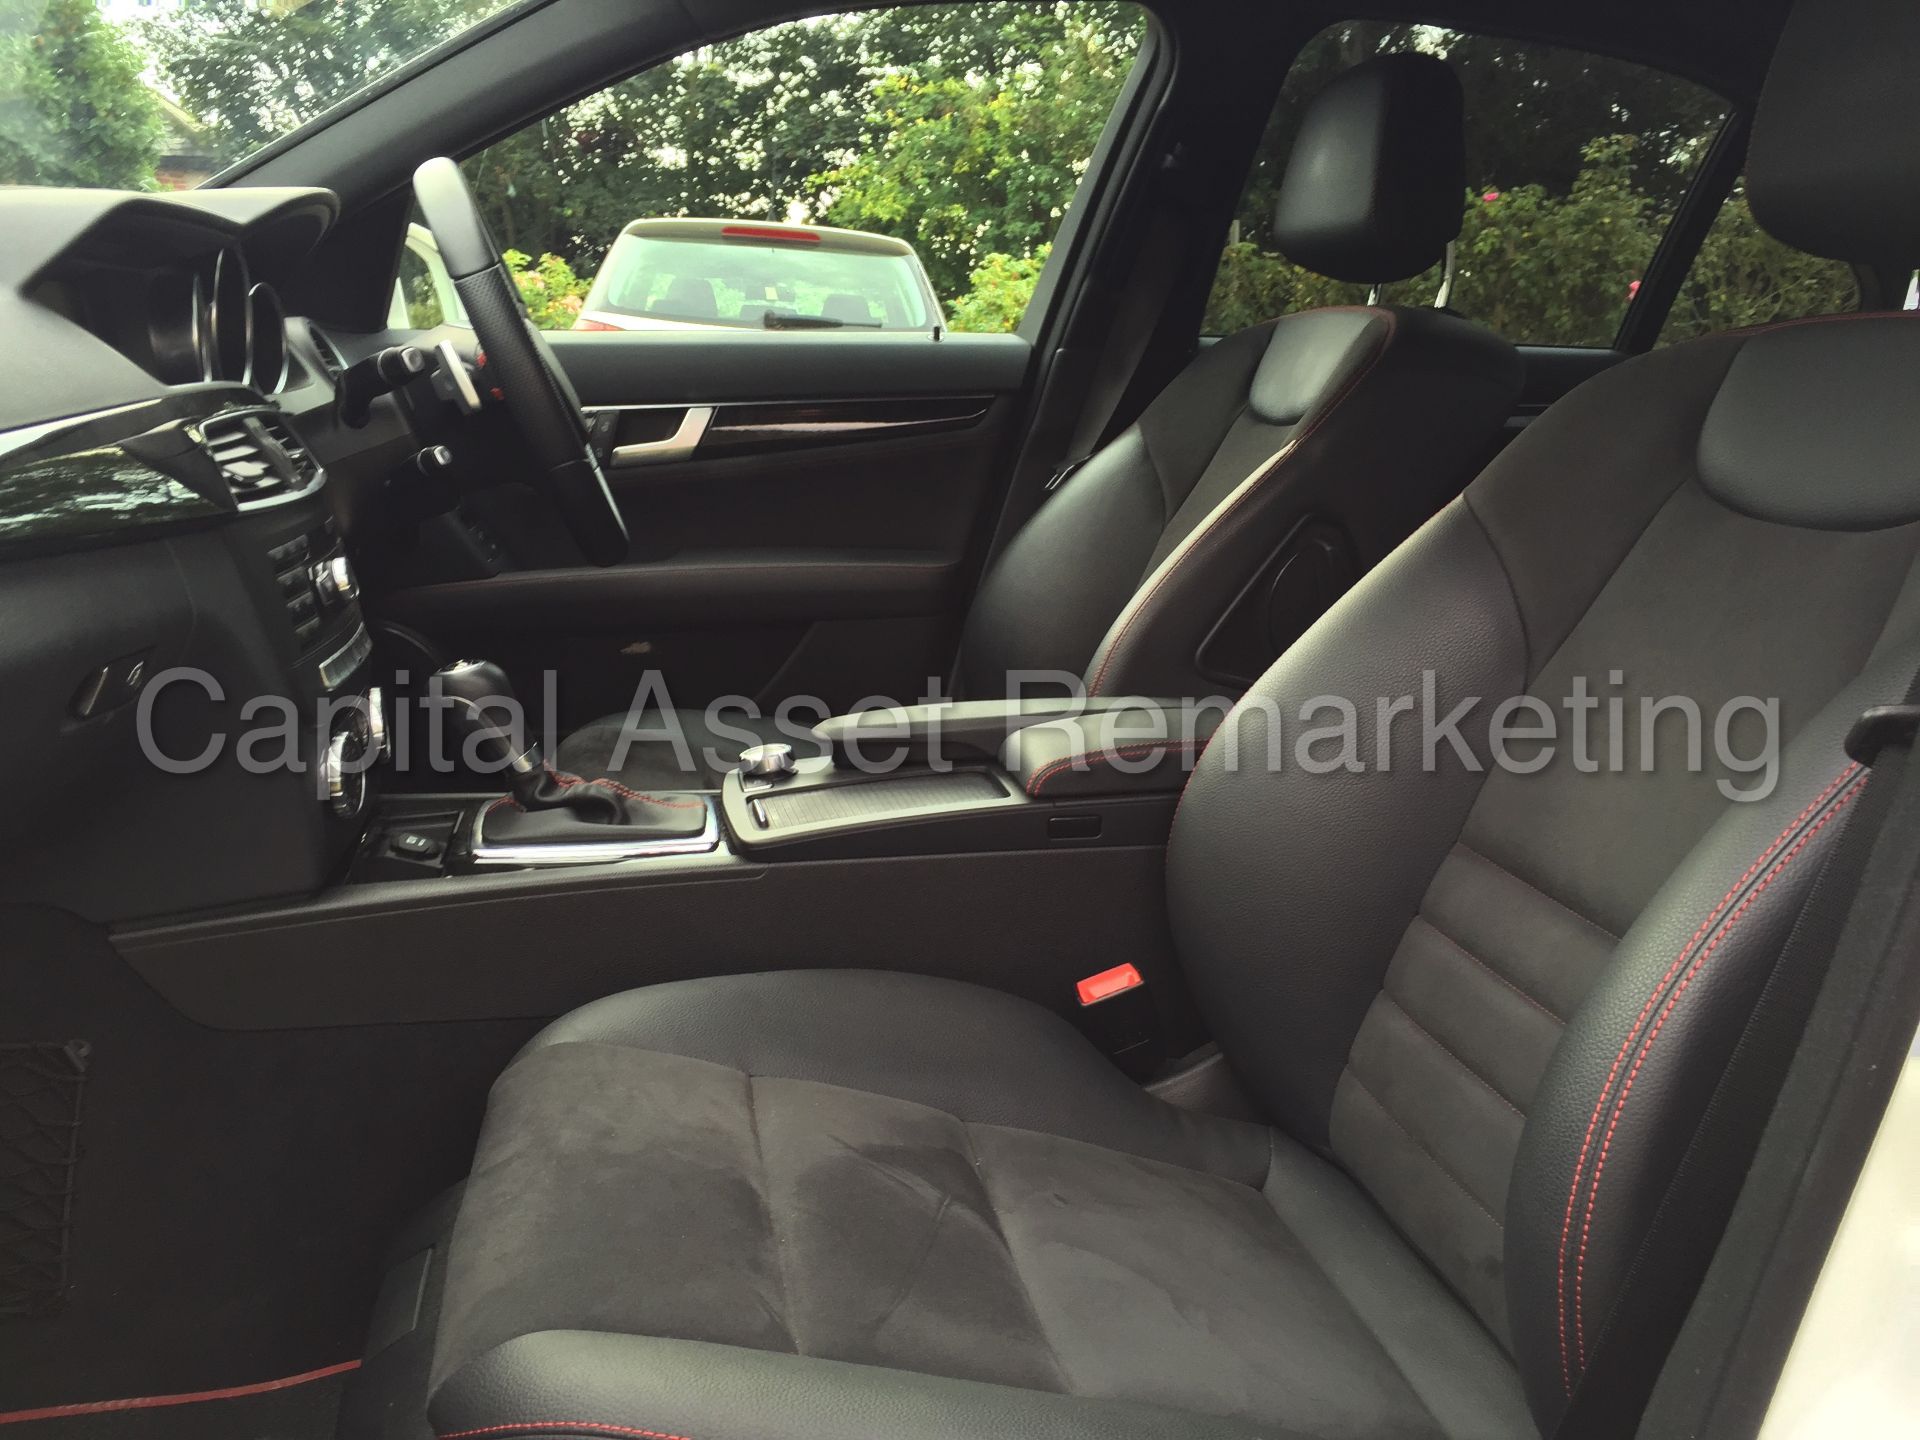 MERCEDES-BENZ C220 CDI 'AMG SPORT PLUS' (2014 MODEL) '7-G AUTO - LEATHER - SAT NAV' (1 OWNER) - Image 21 of 29